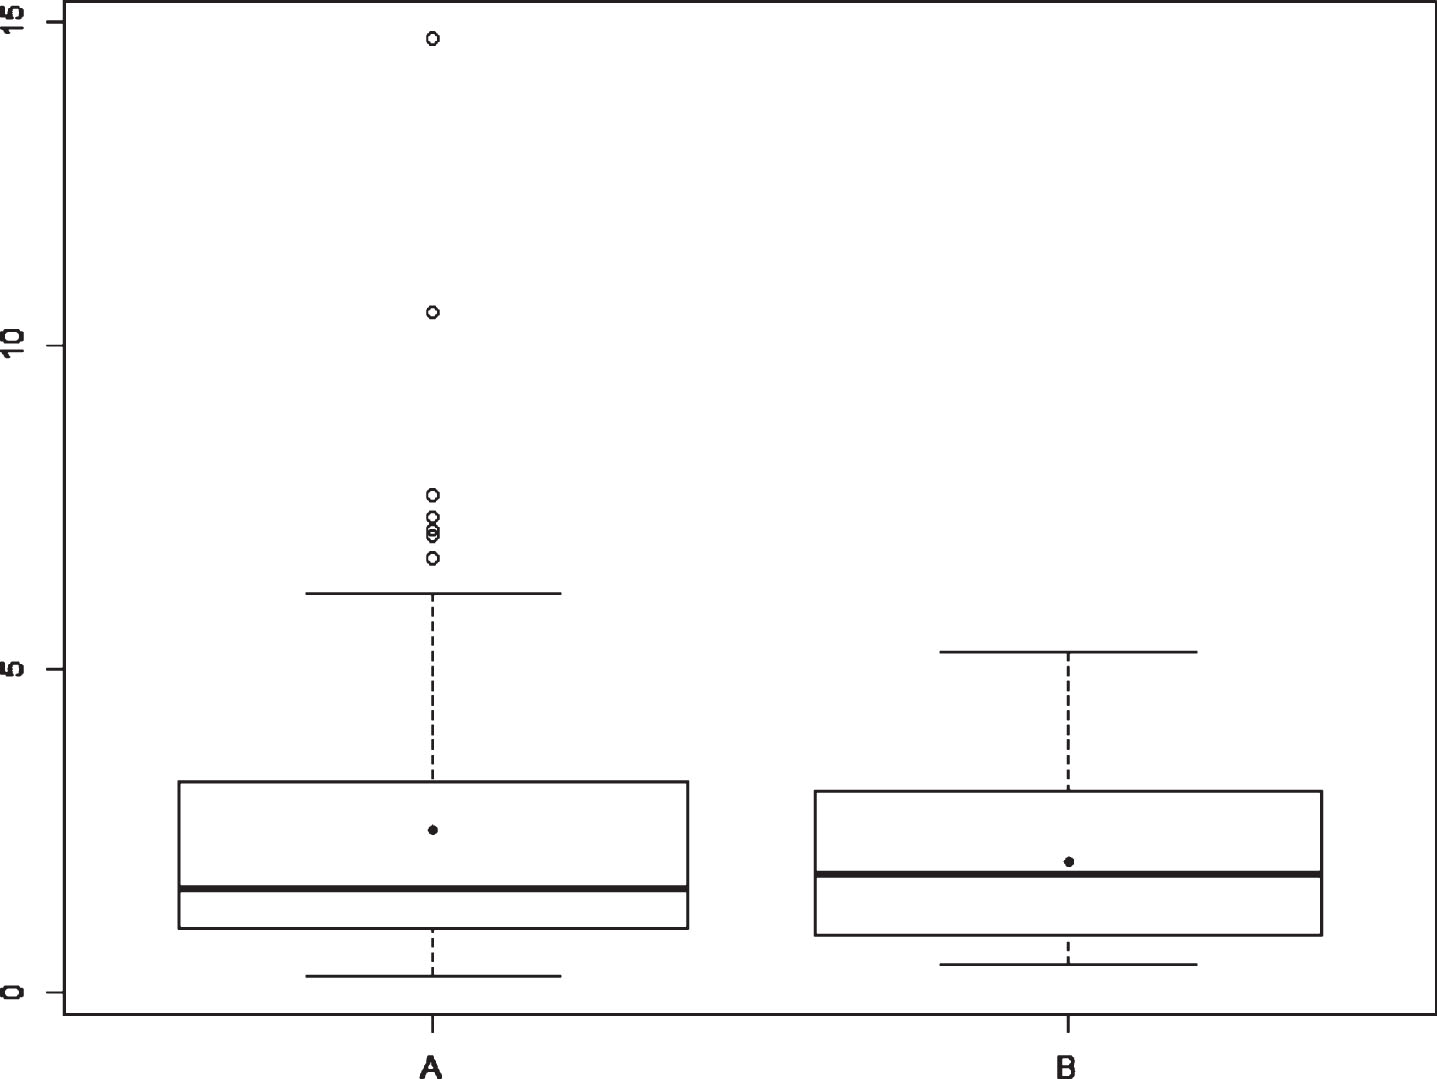 Boxplot for RTG duration [min] in A (TDD) and B (CTDD) – Experiment 2, Developer 2.